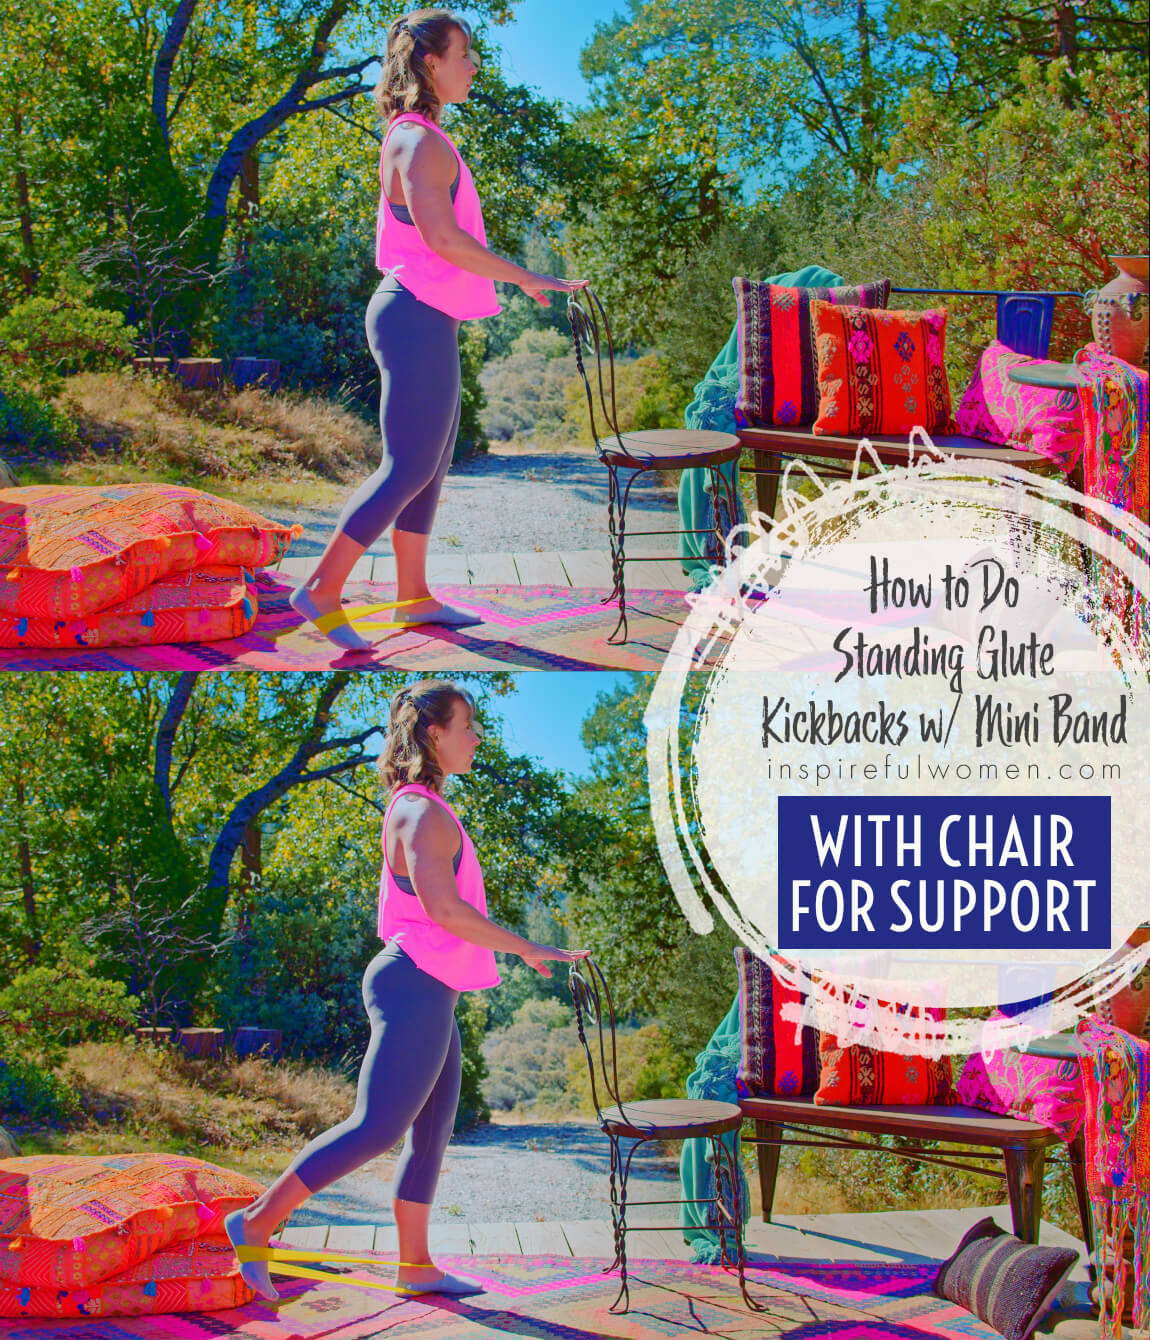 how-to-mini-band-standing-glute-kickback-with-chair-support-glute-isolation-exercise-proper-form